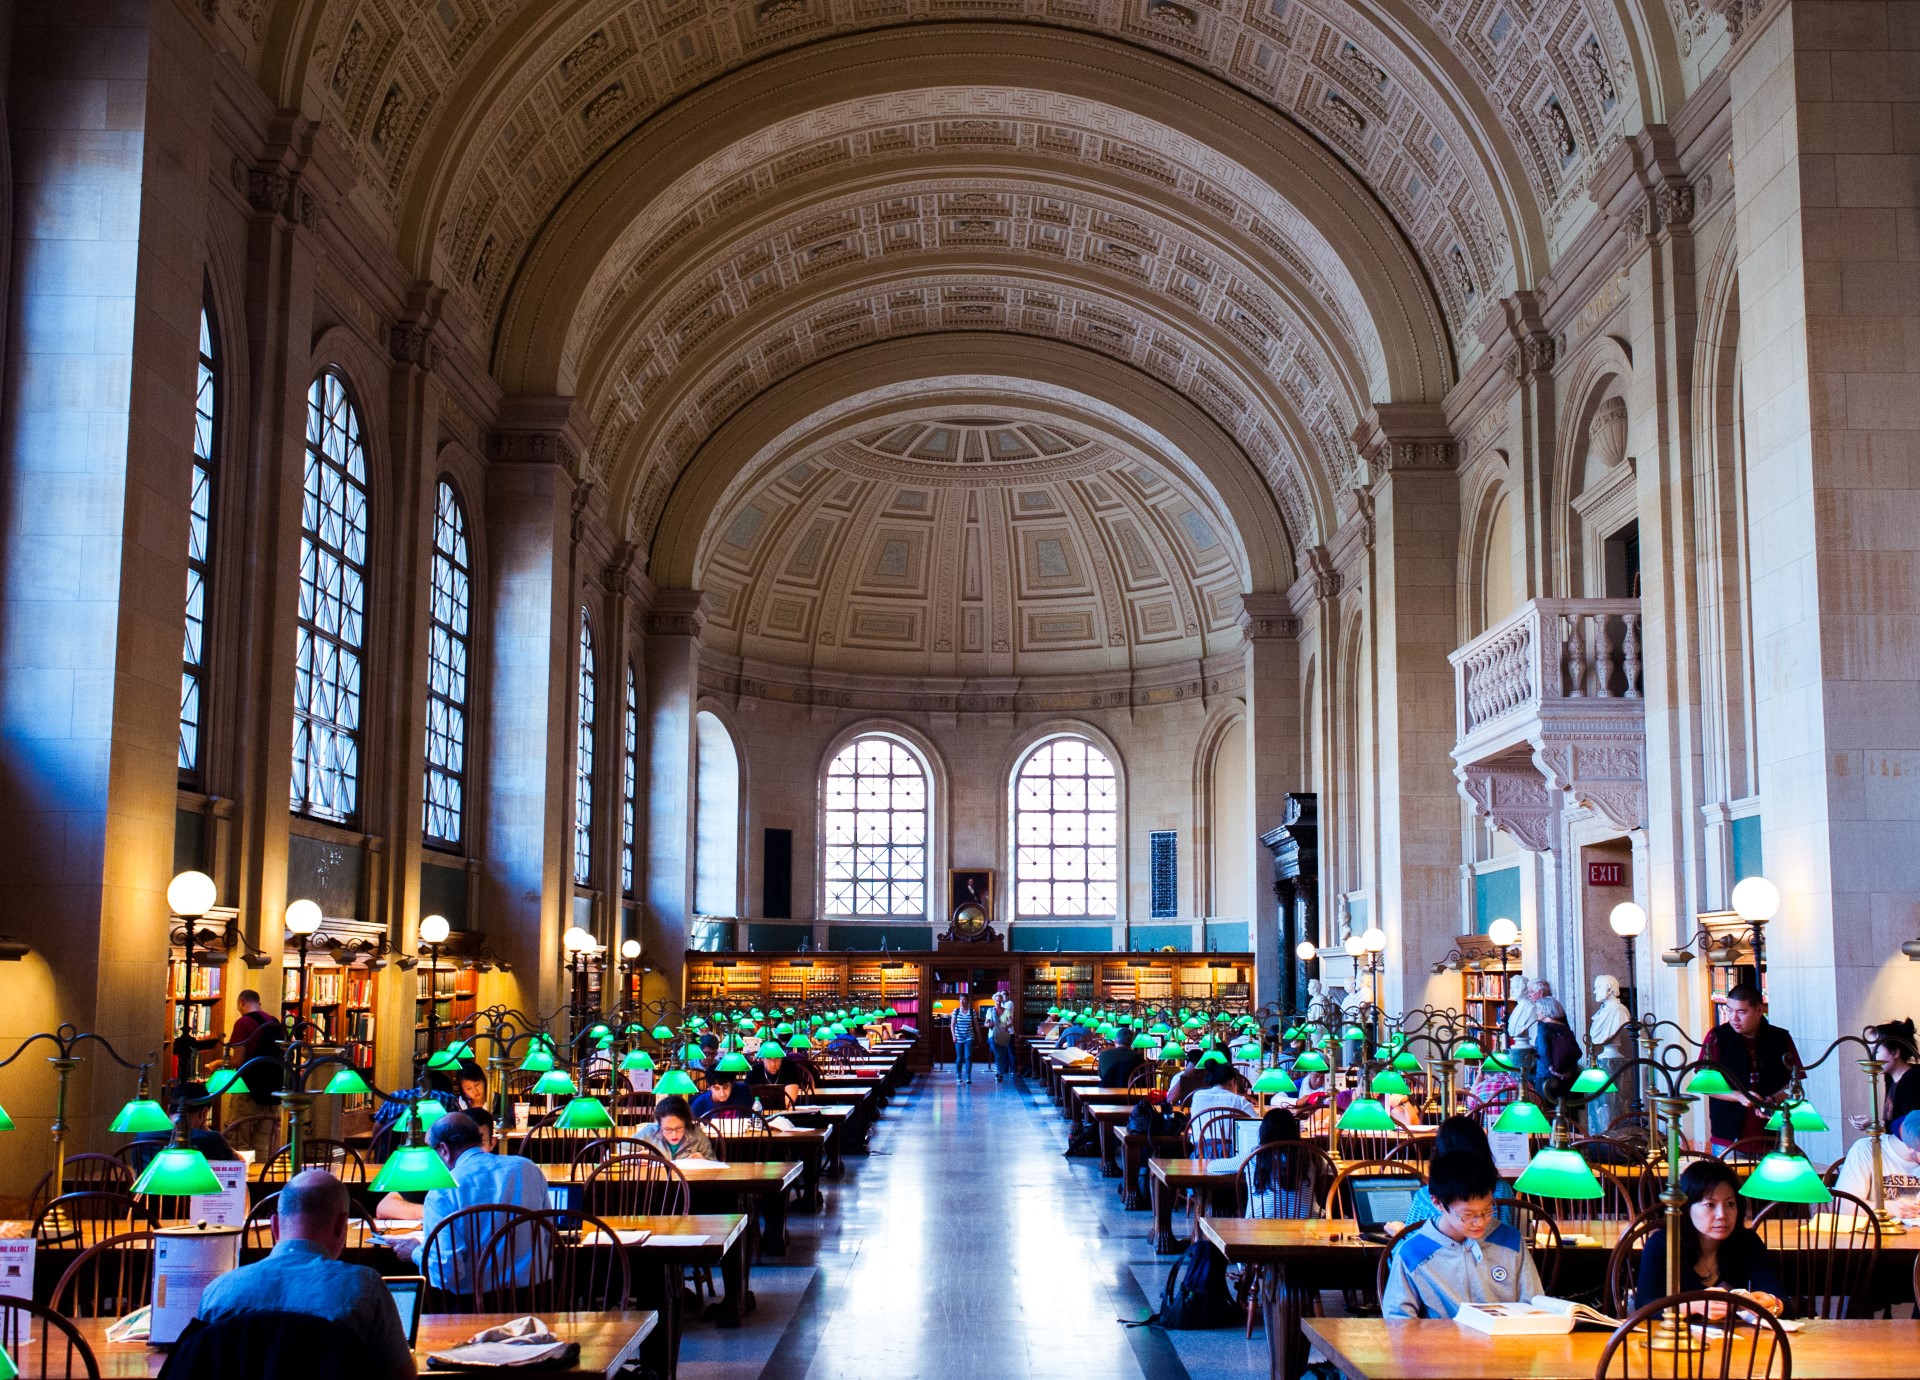 Speaking Up, Speaking Out at the Boston Public Library